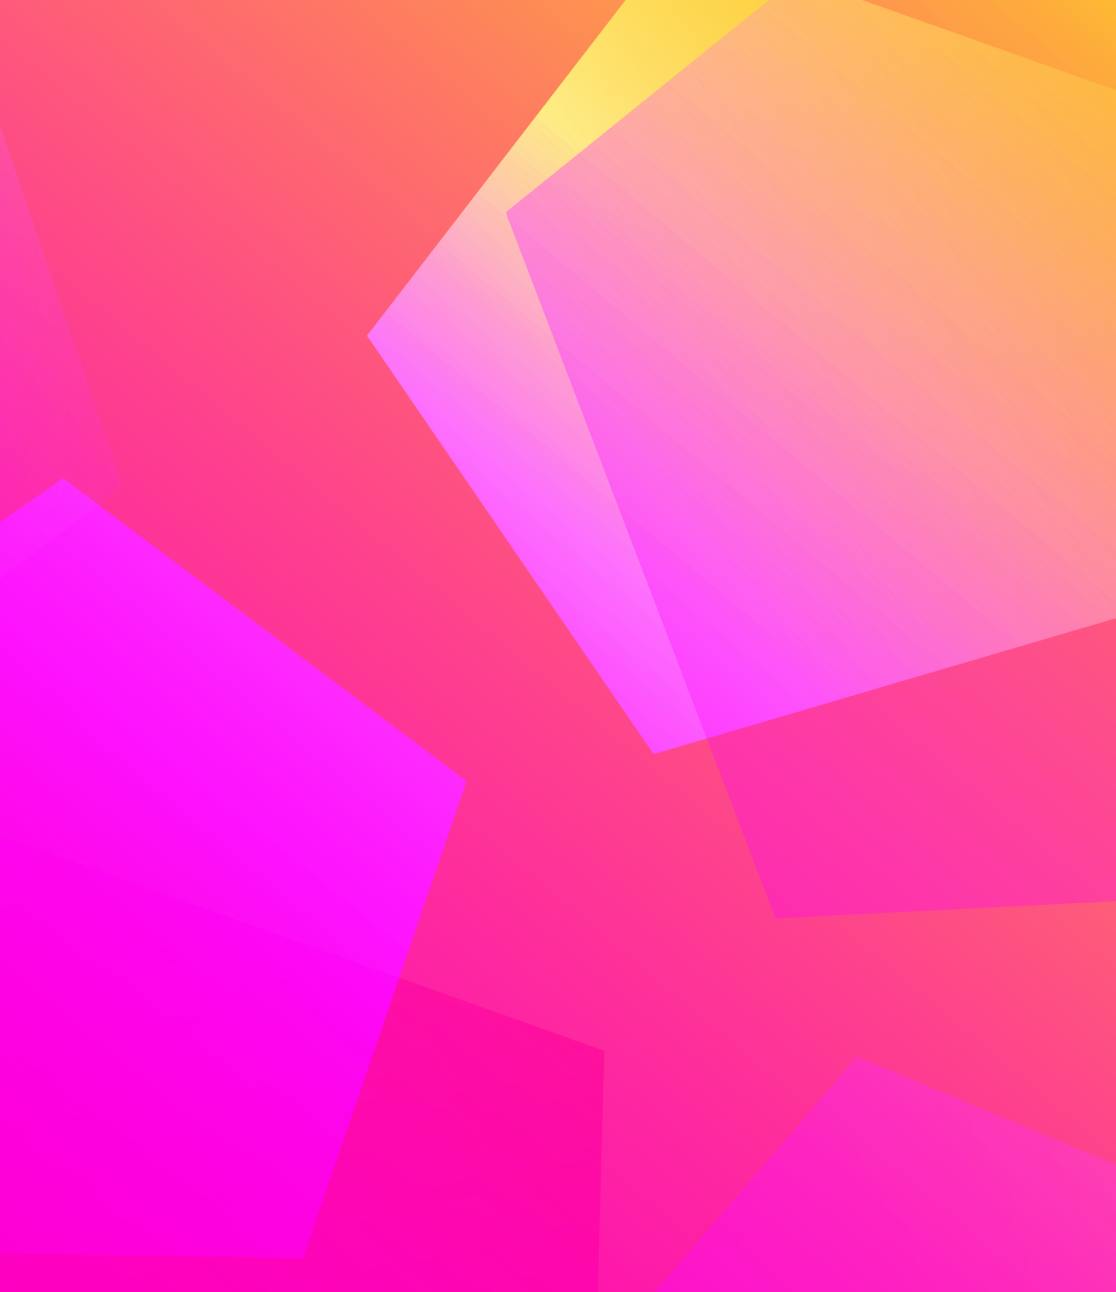 A digital wallpaper comprised of layered oversized pentagons, resulting in a wallpaper that graduates from magenta to orange.